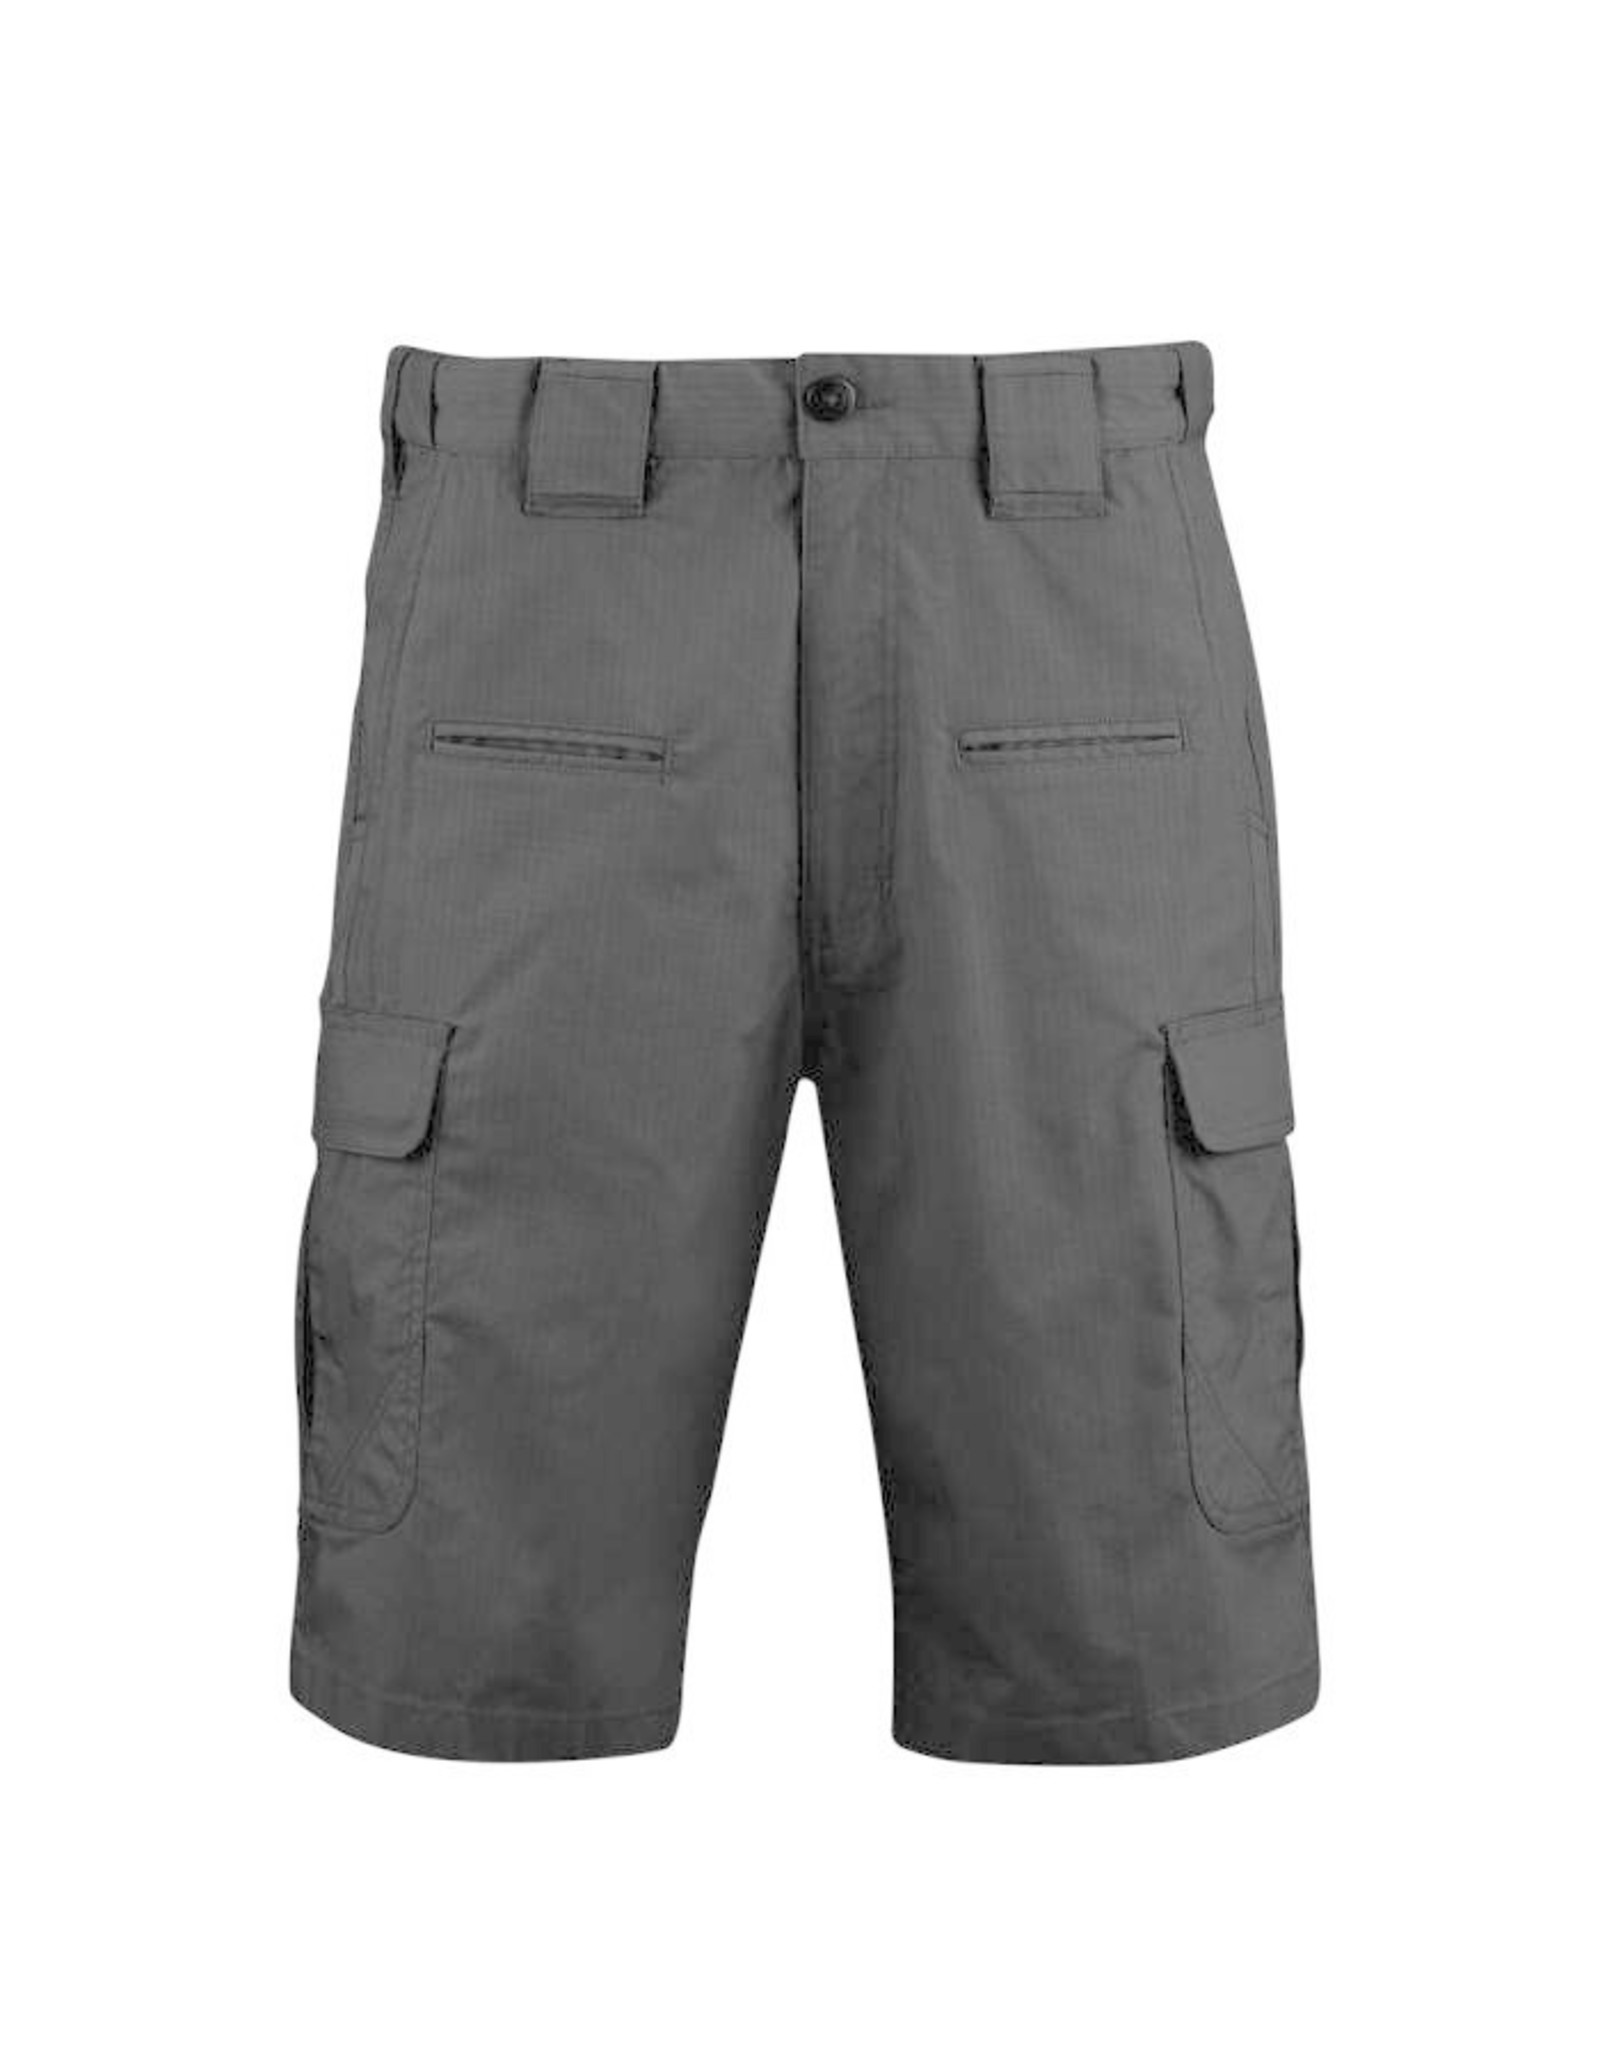 MEN'S KINETIC TACTICAL SHORTS - Smith Army Surplus